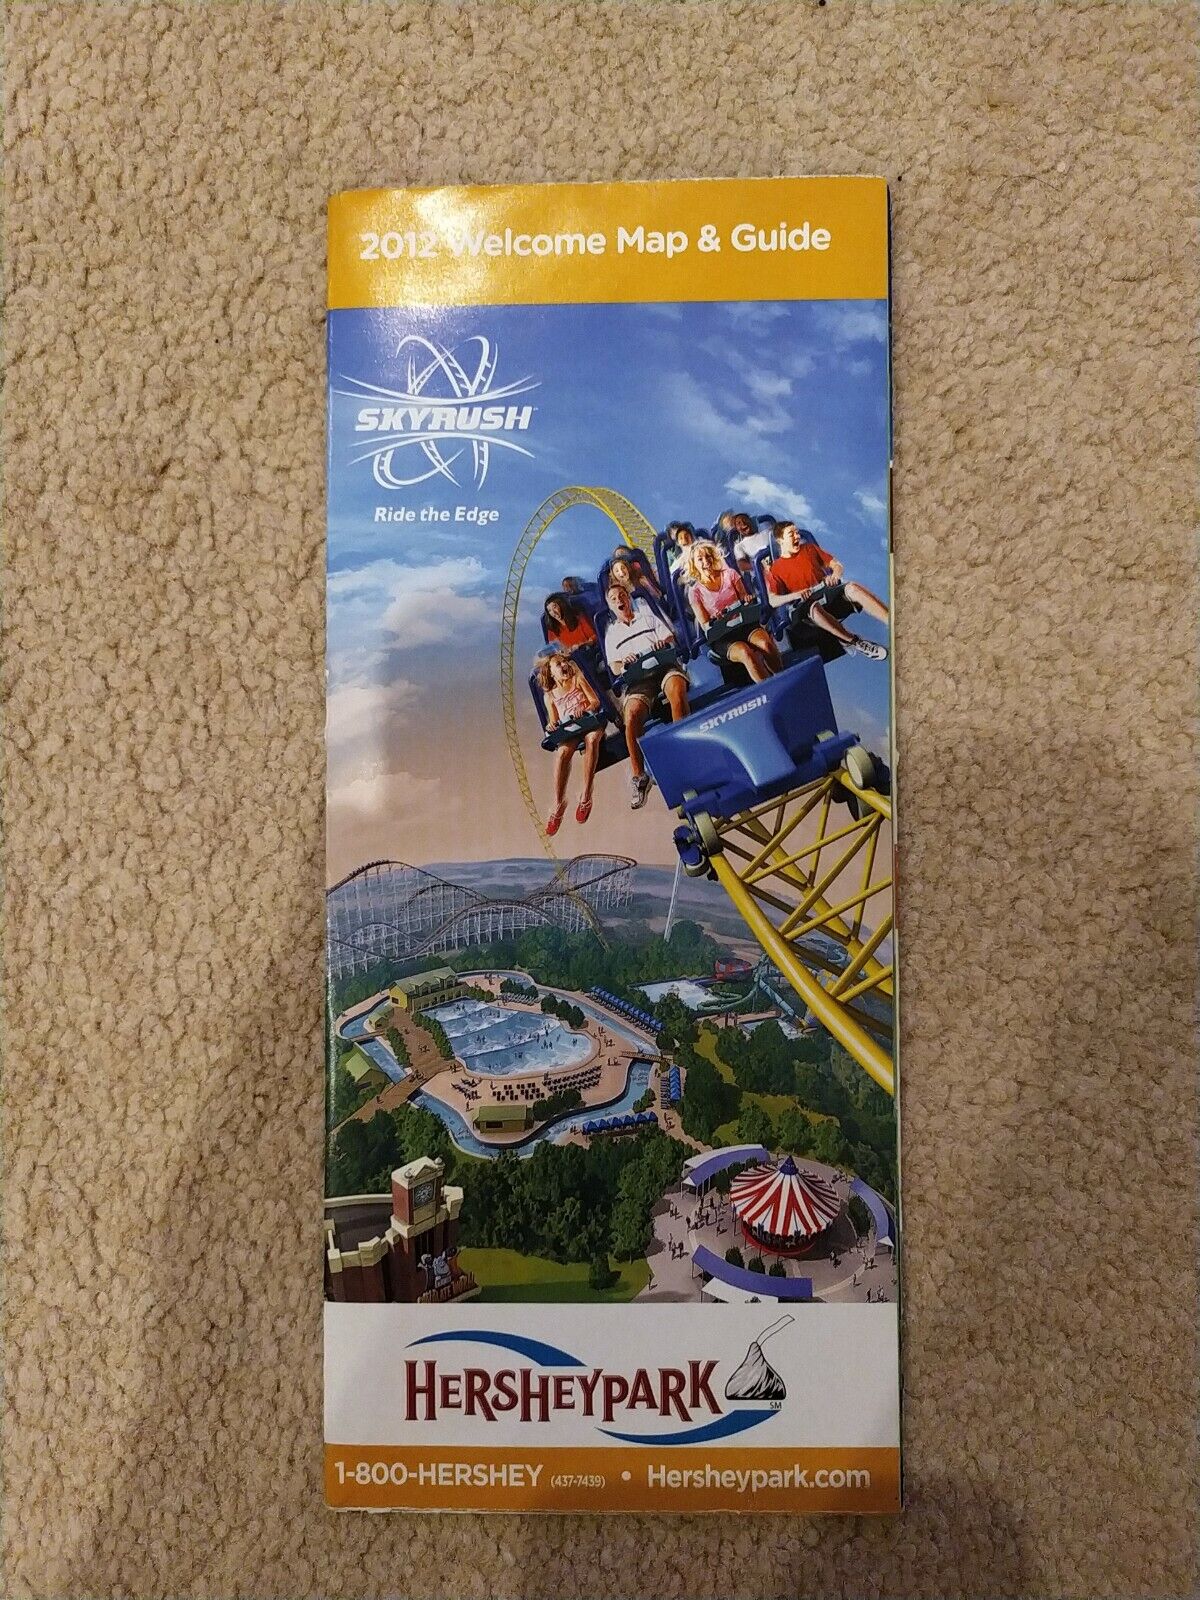 HersheyPark 2012 Welcome Map And Guide - Immaculate Condition